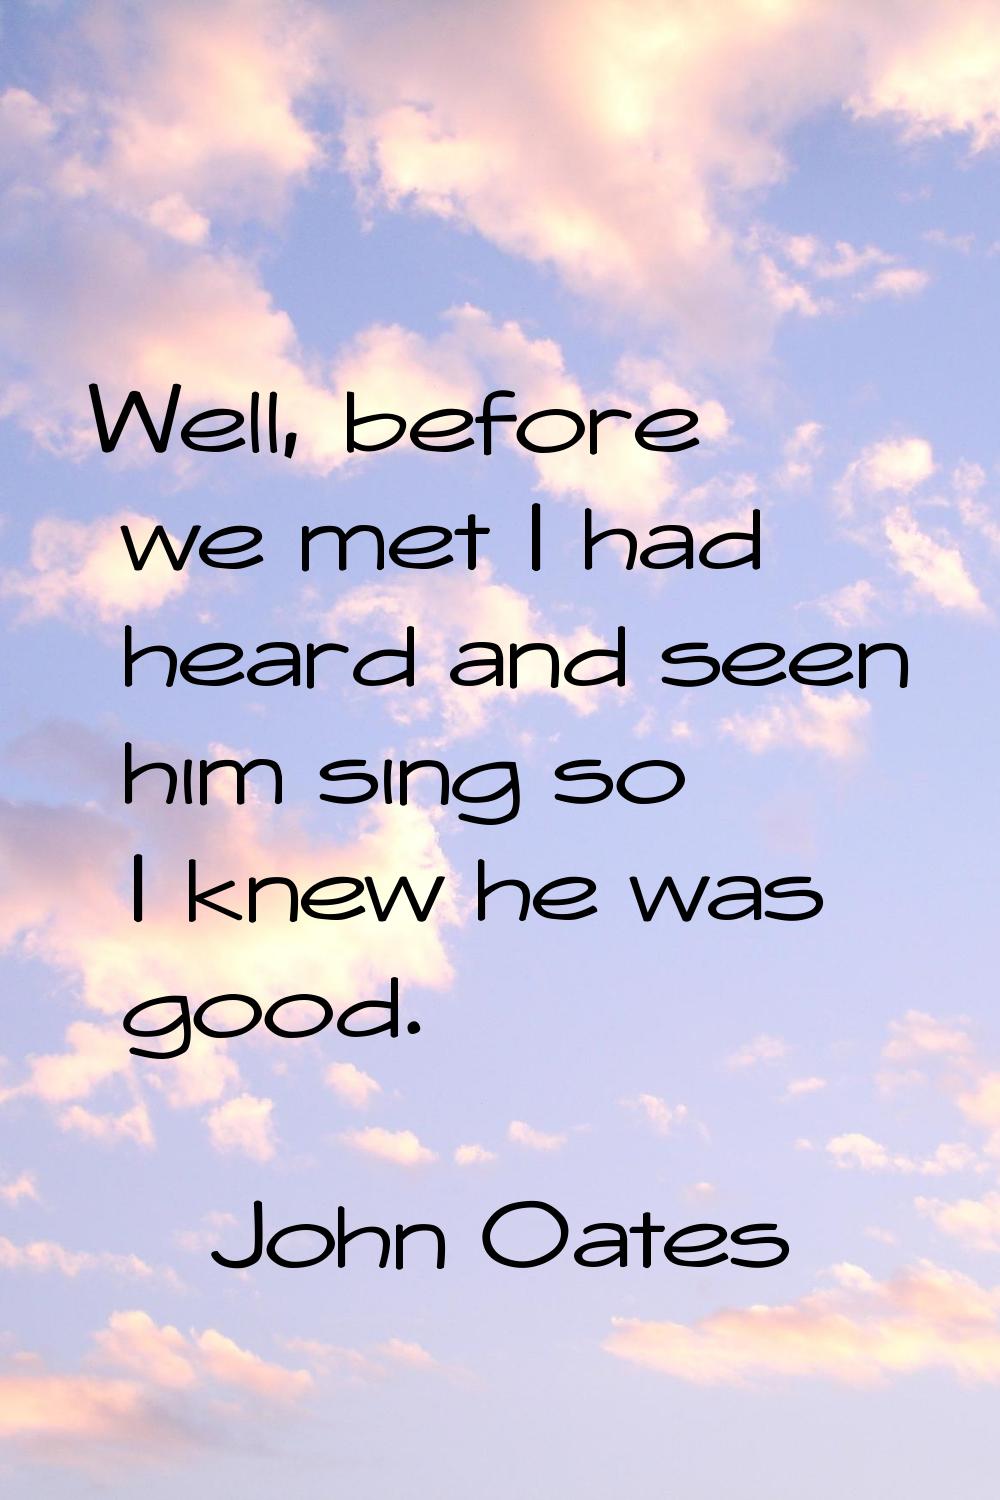 Well, before we met I had heard and seen him sing so I knew he was good.